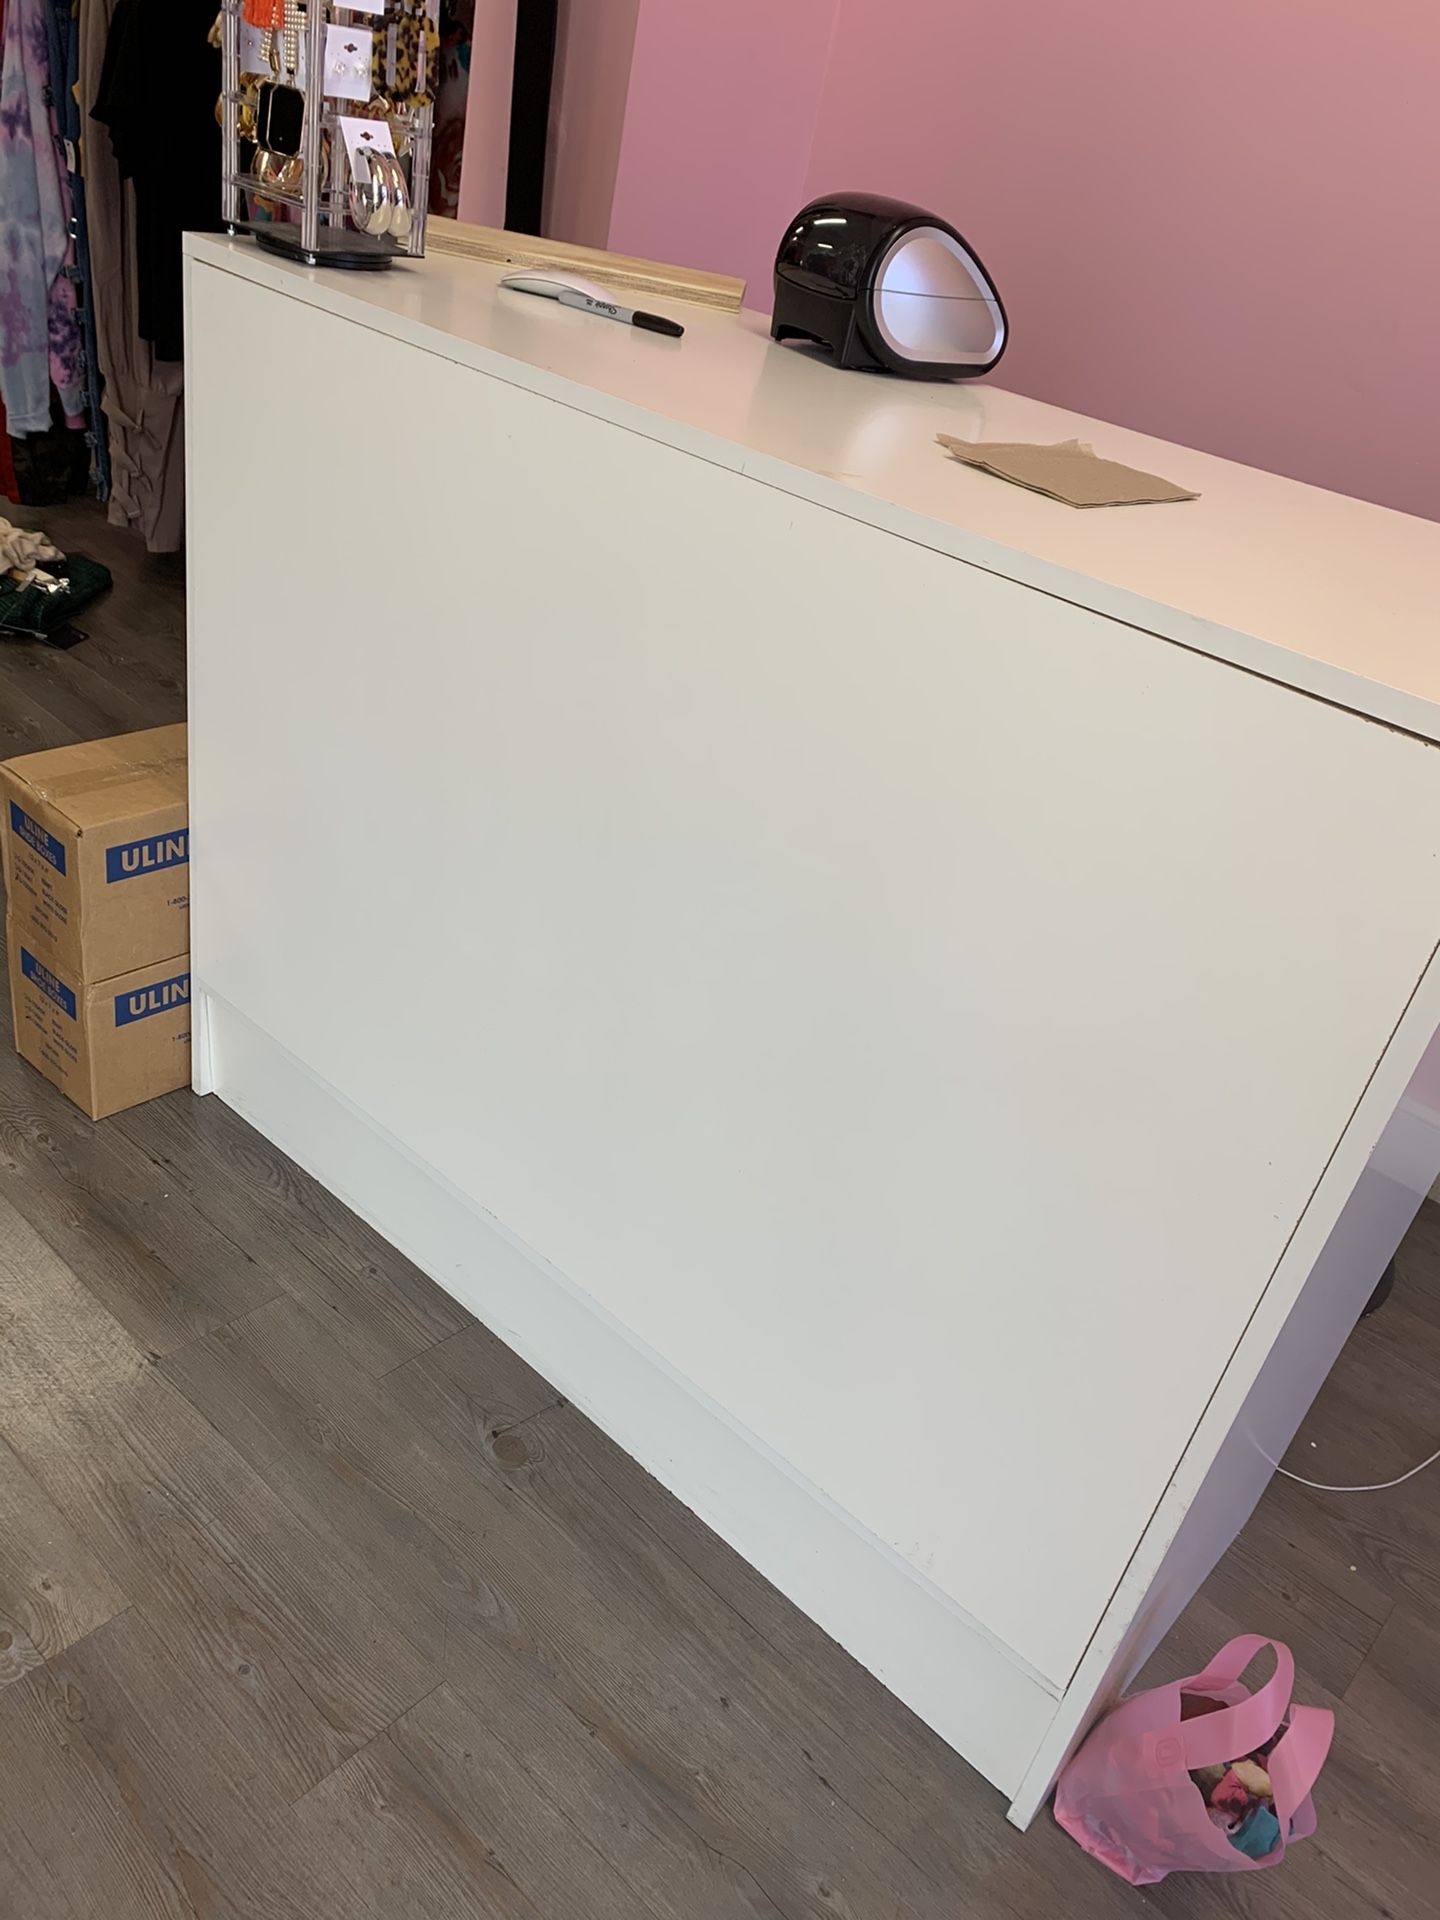 Retail Counter with shelves